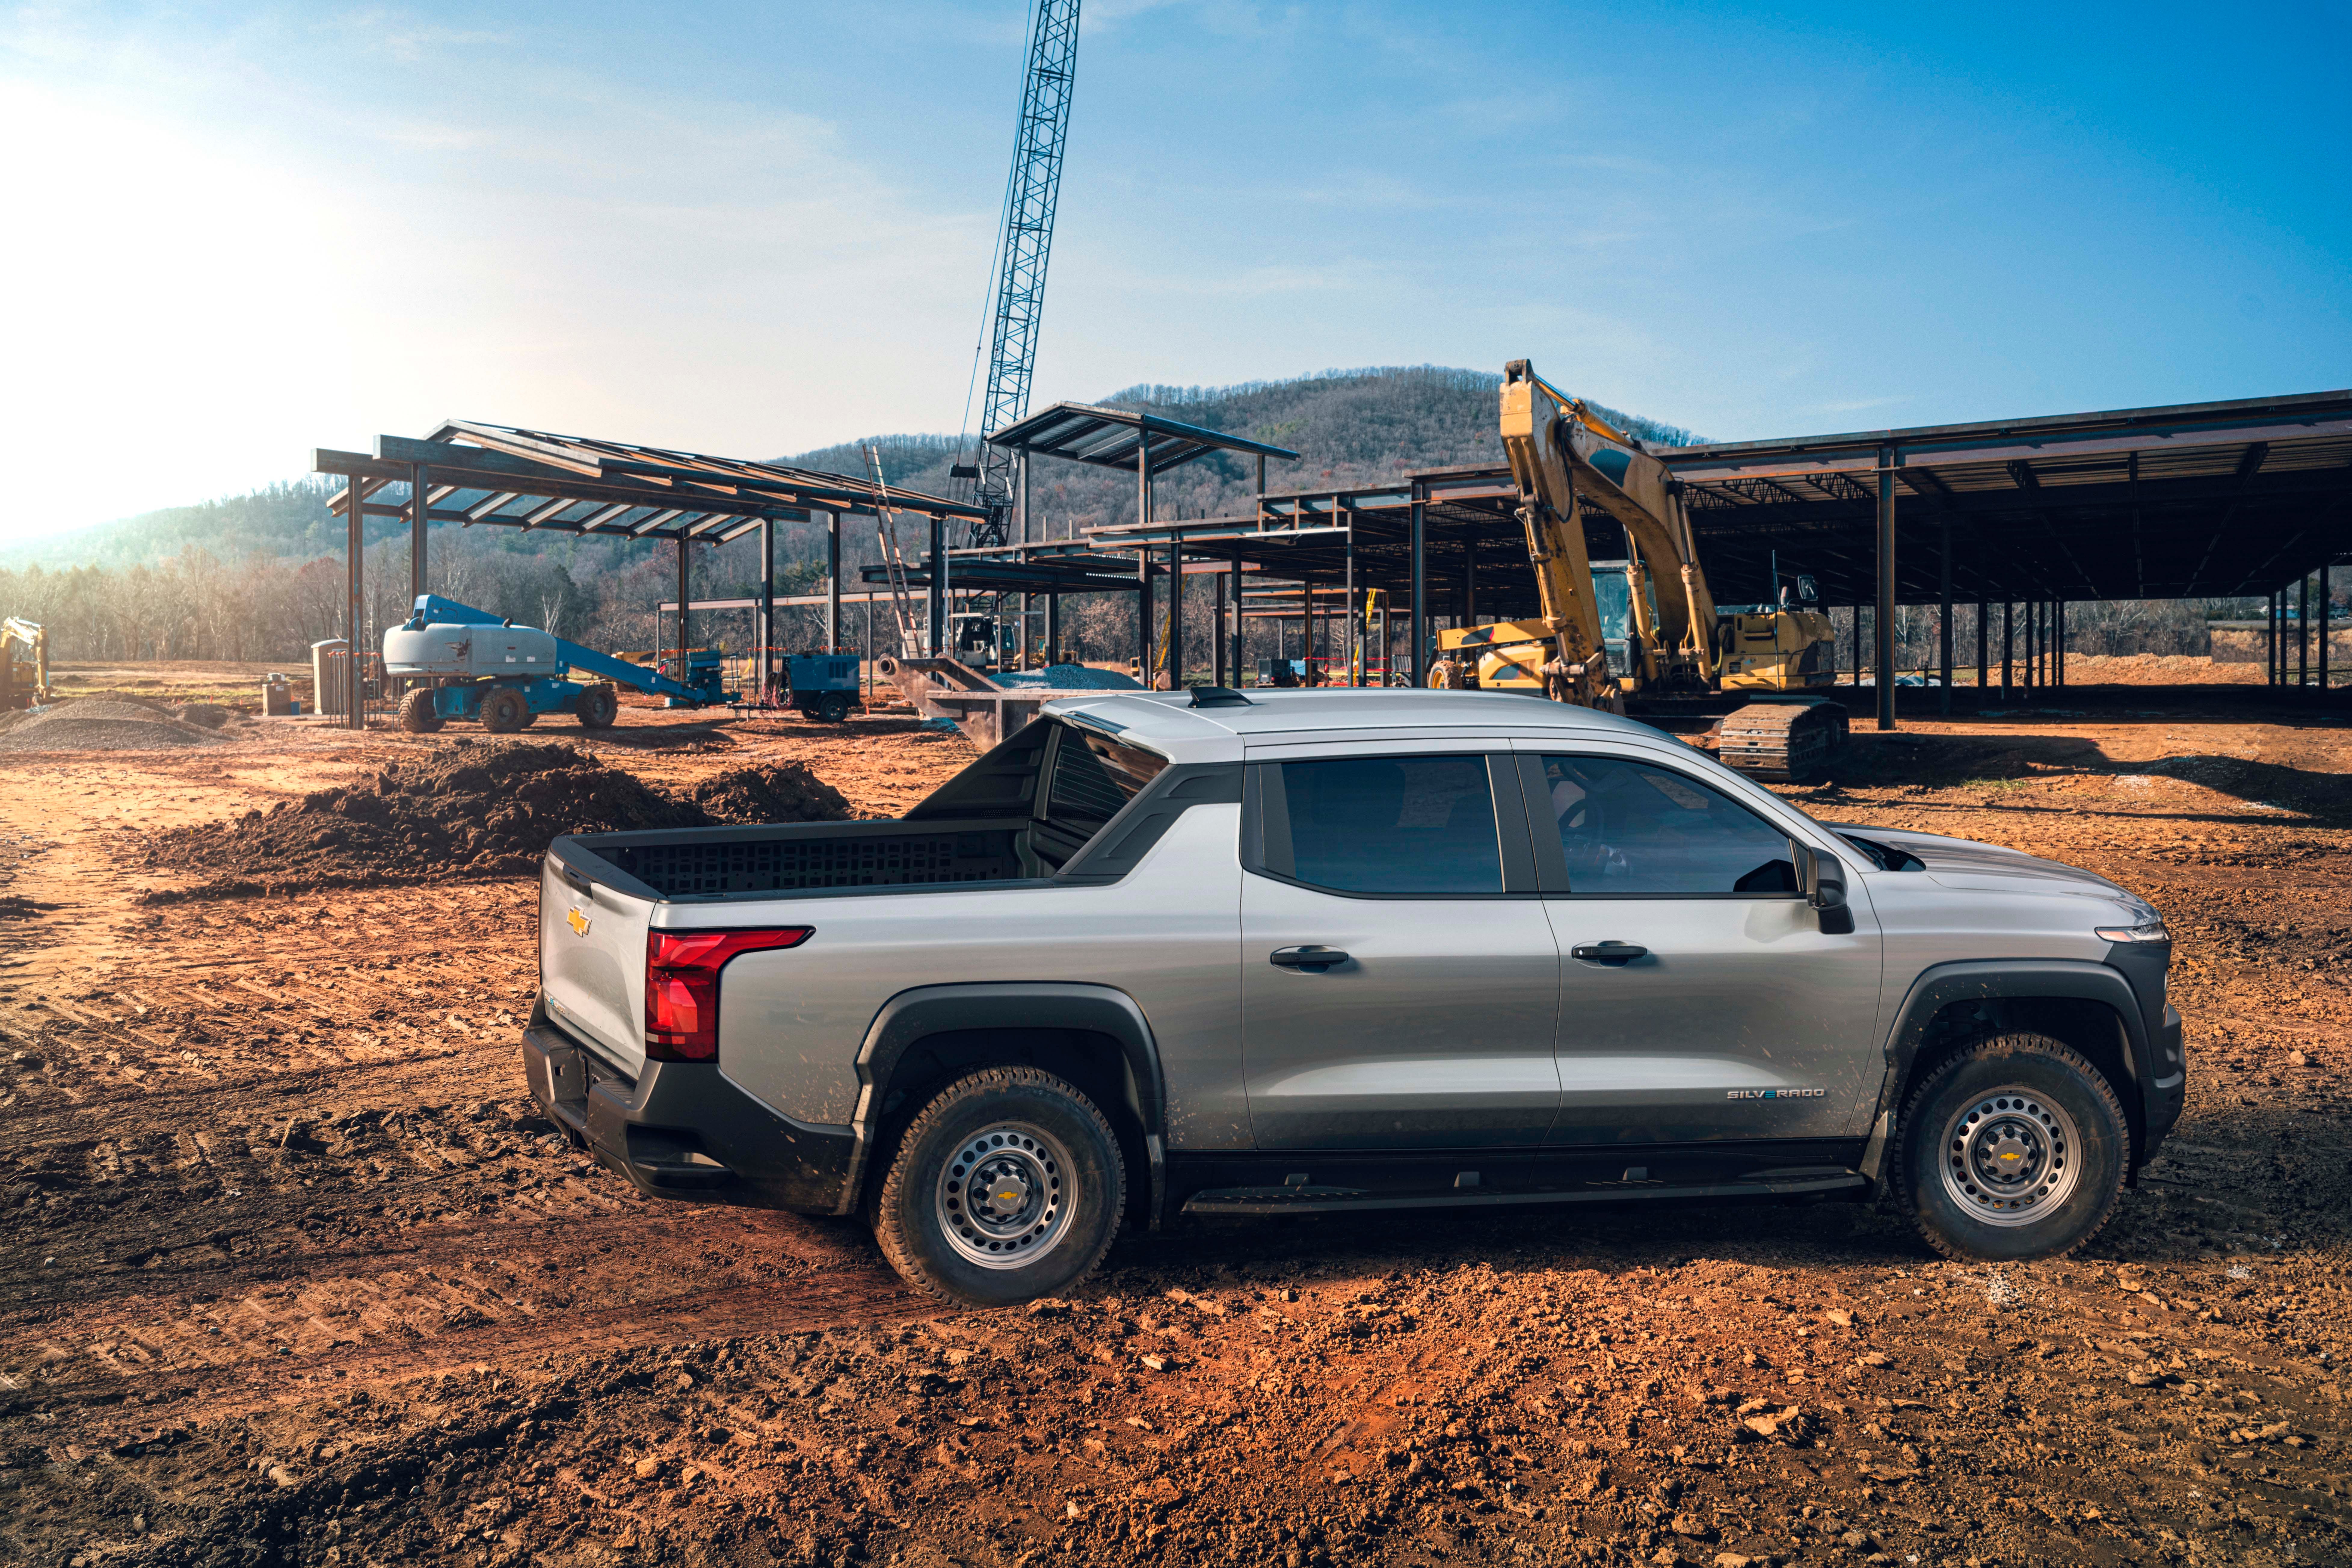 The 400-mile range Chevrolet Silverado EV Work Truck will only be offered to fleets in spring 2023. A cheaper, $40k Work Truck will follow in 2024.